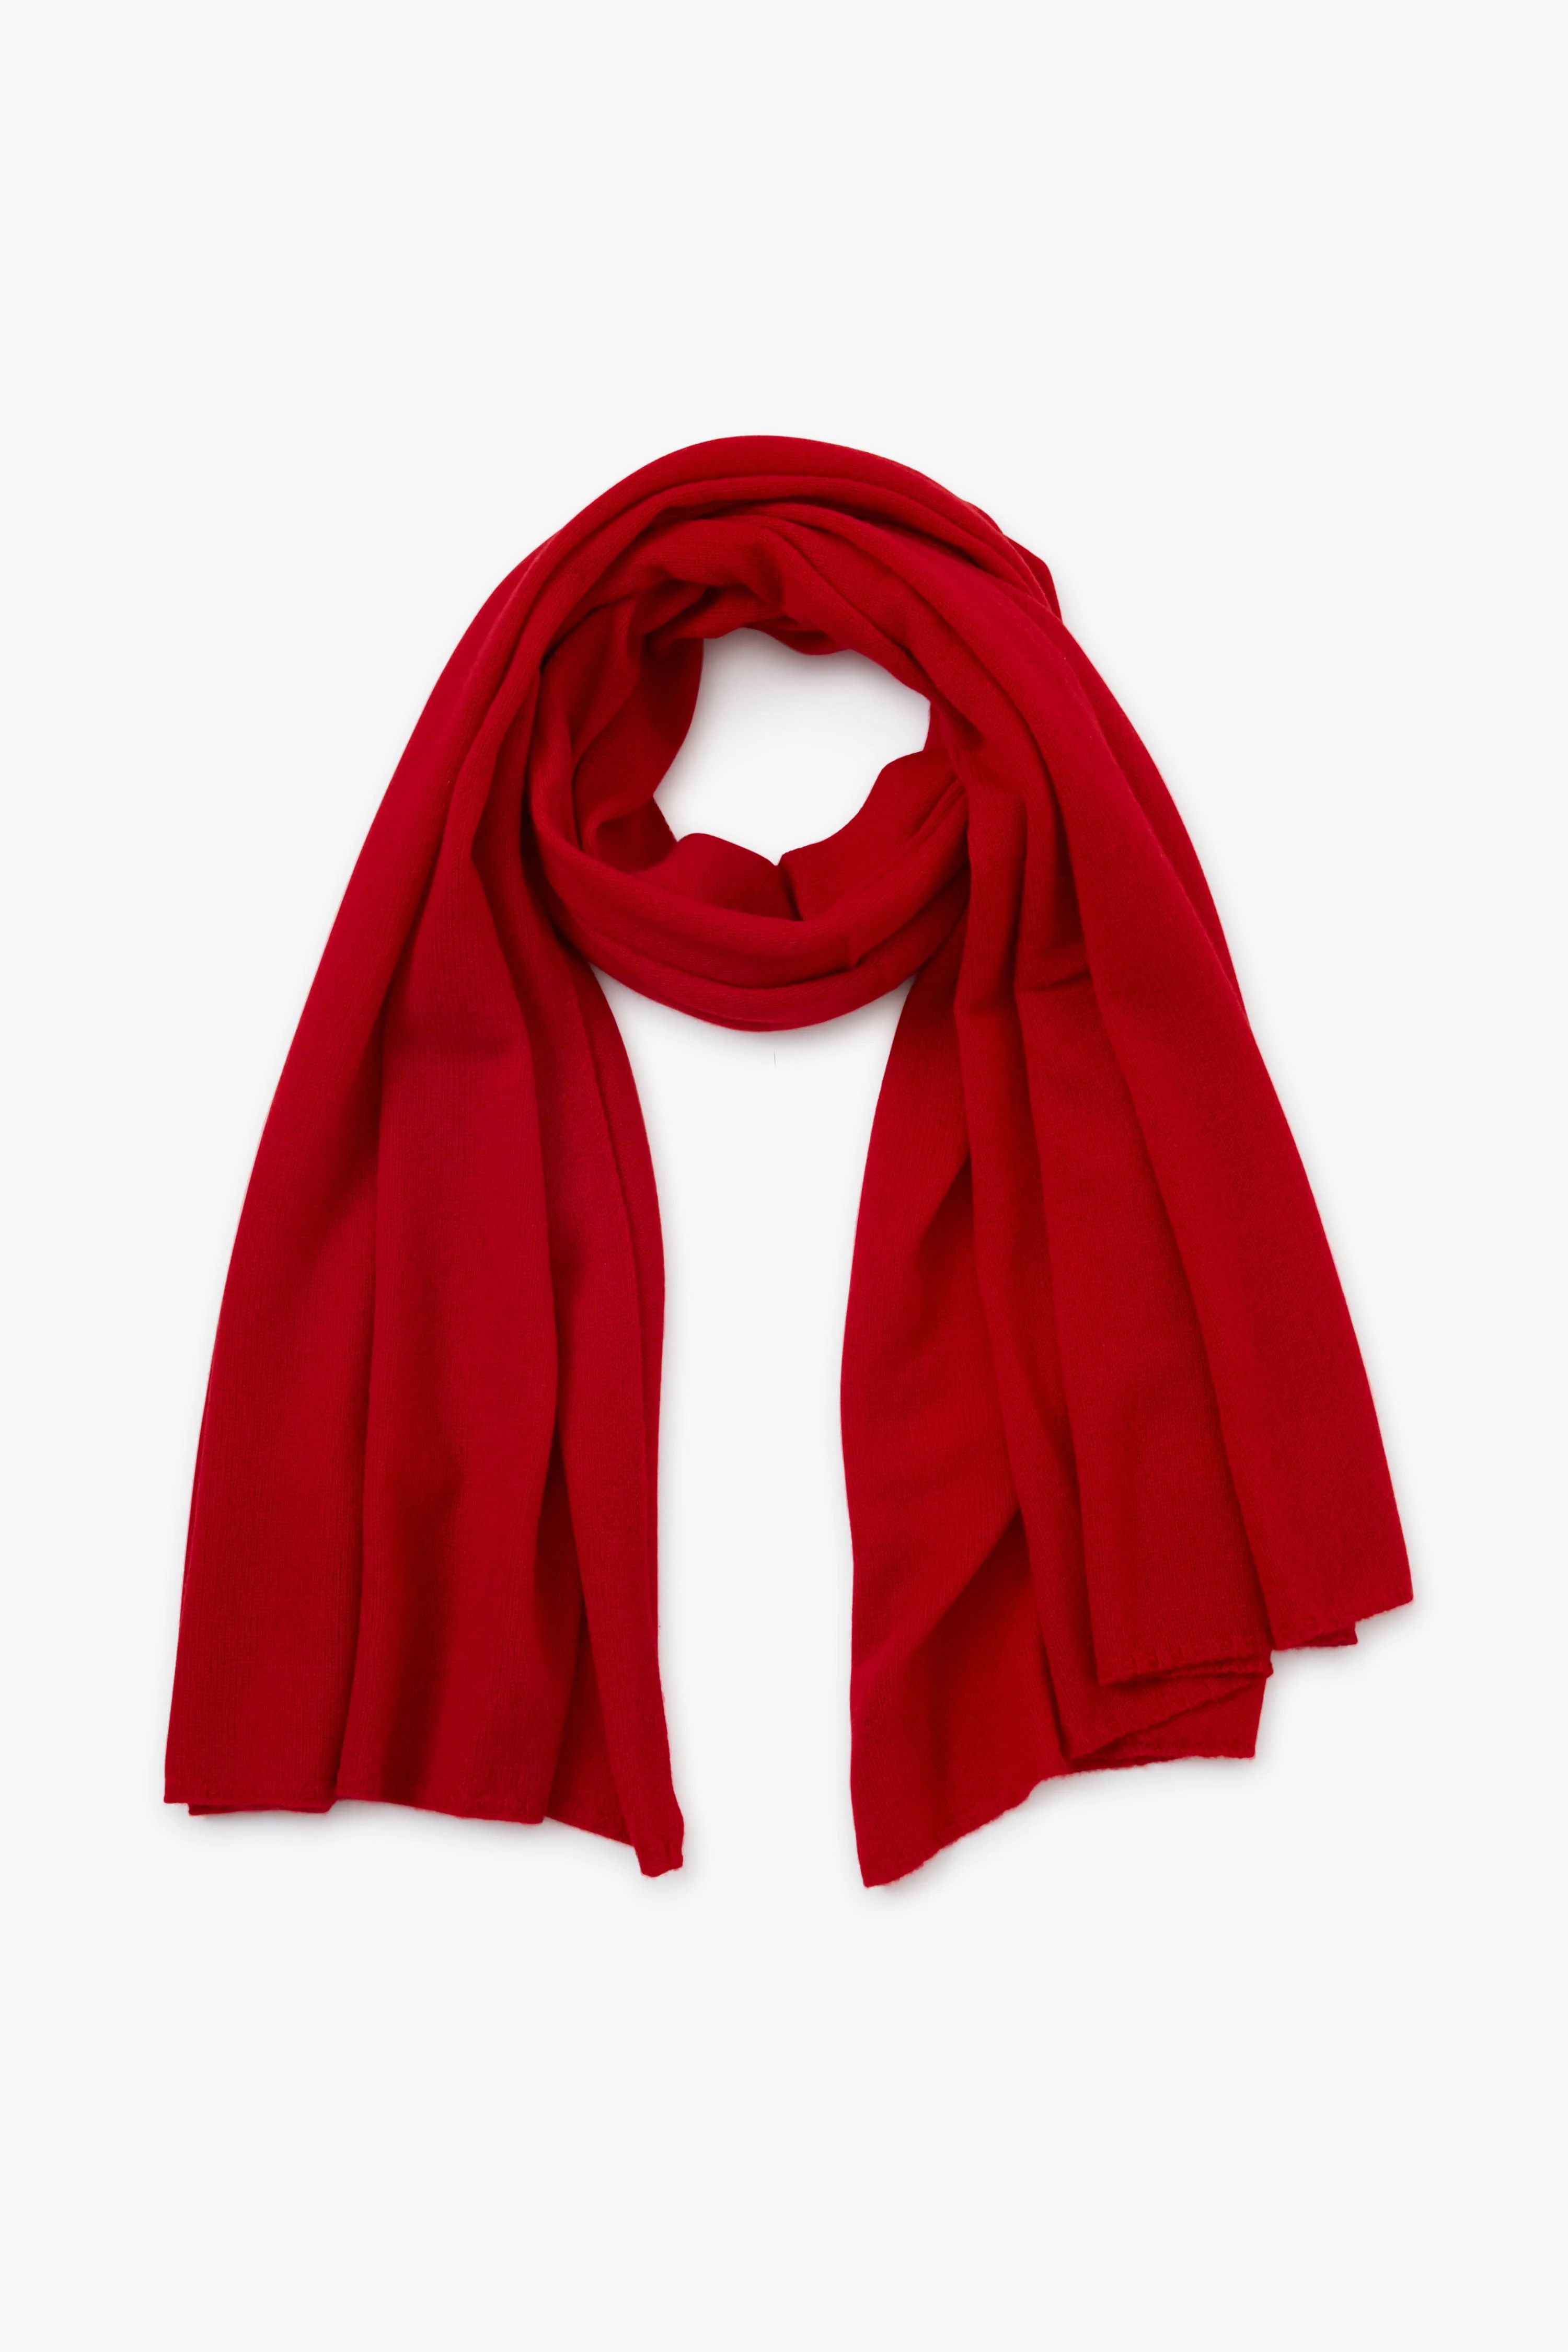 Exclusive Red Cashmere Travel Wrap | Tuckernuck (US)